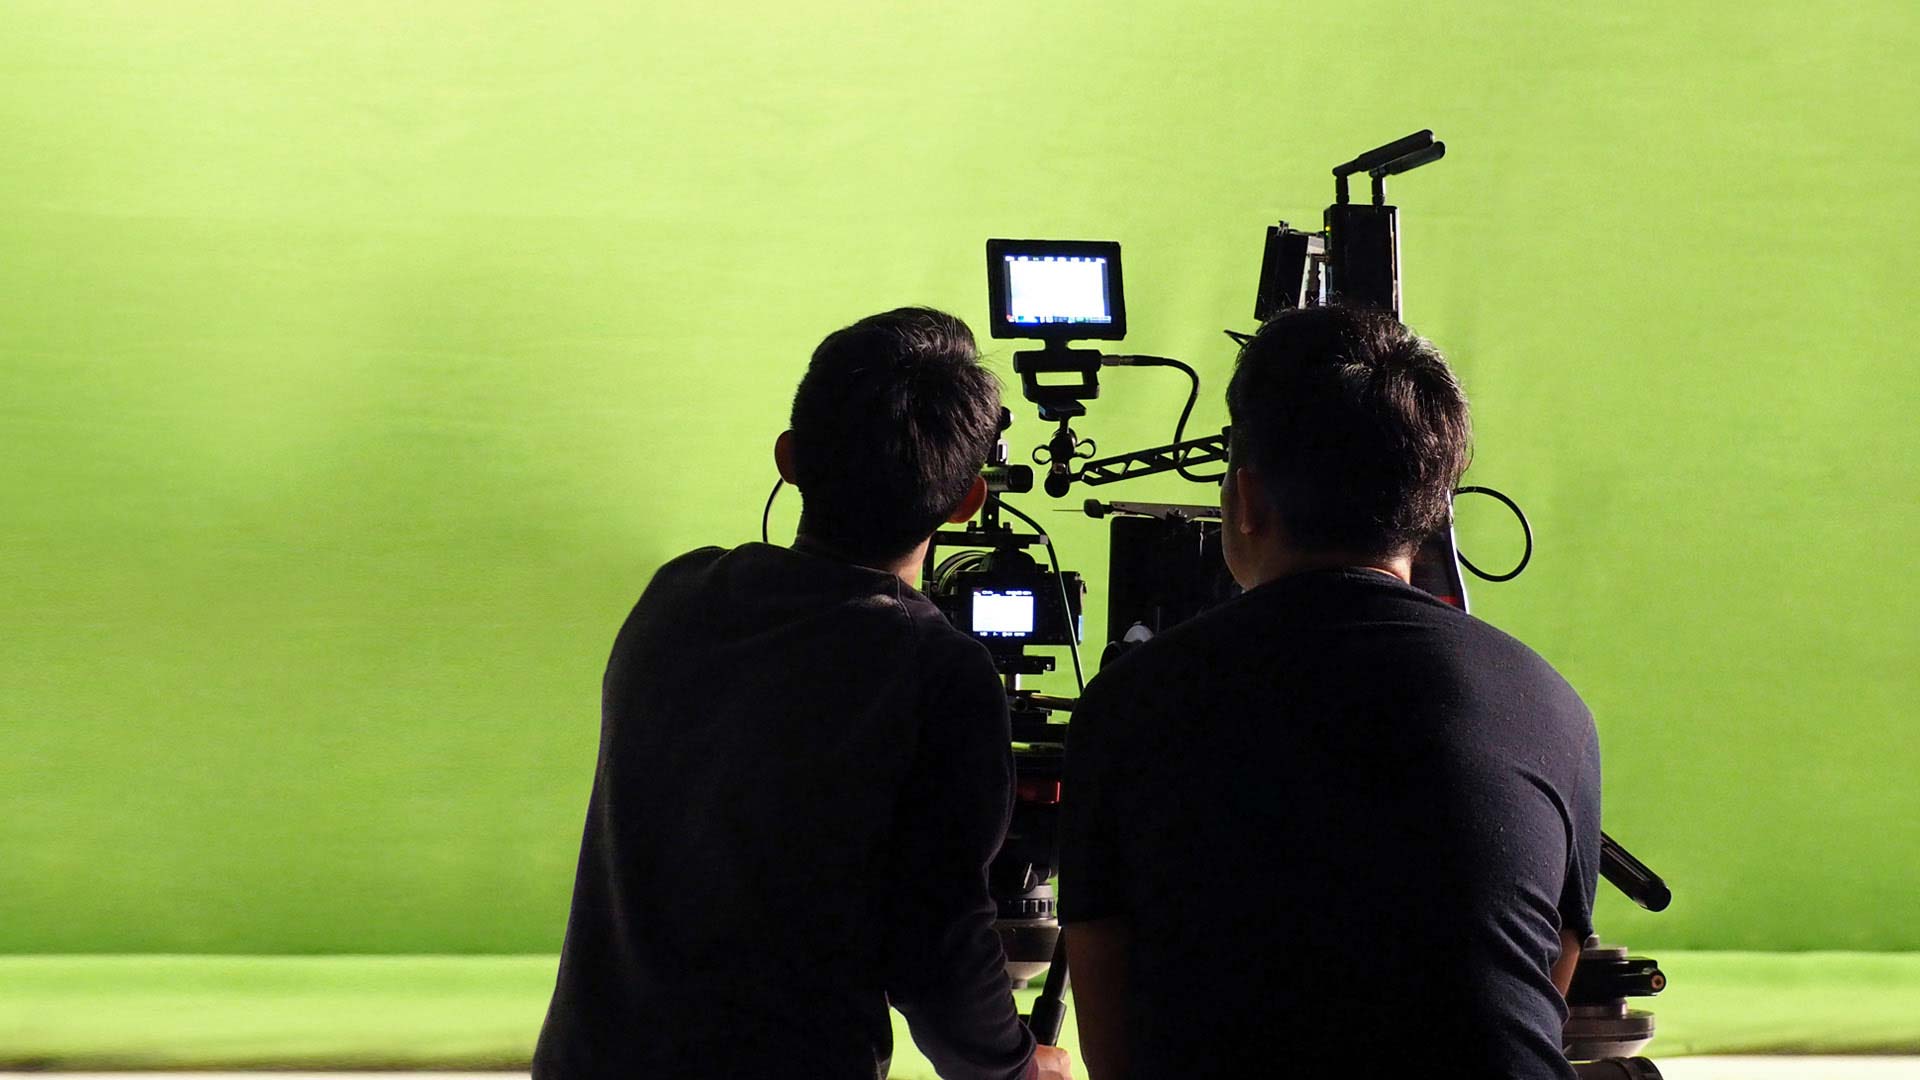 Filming on a greenscreen stage.